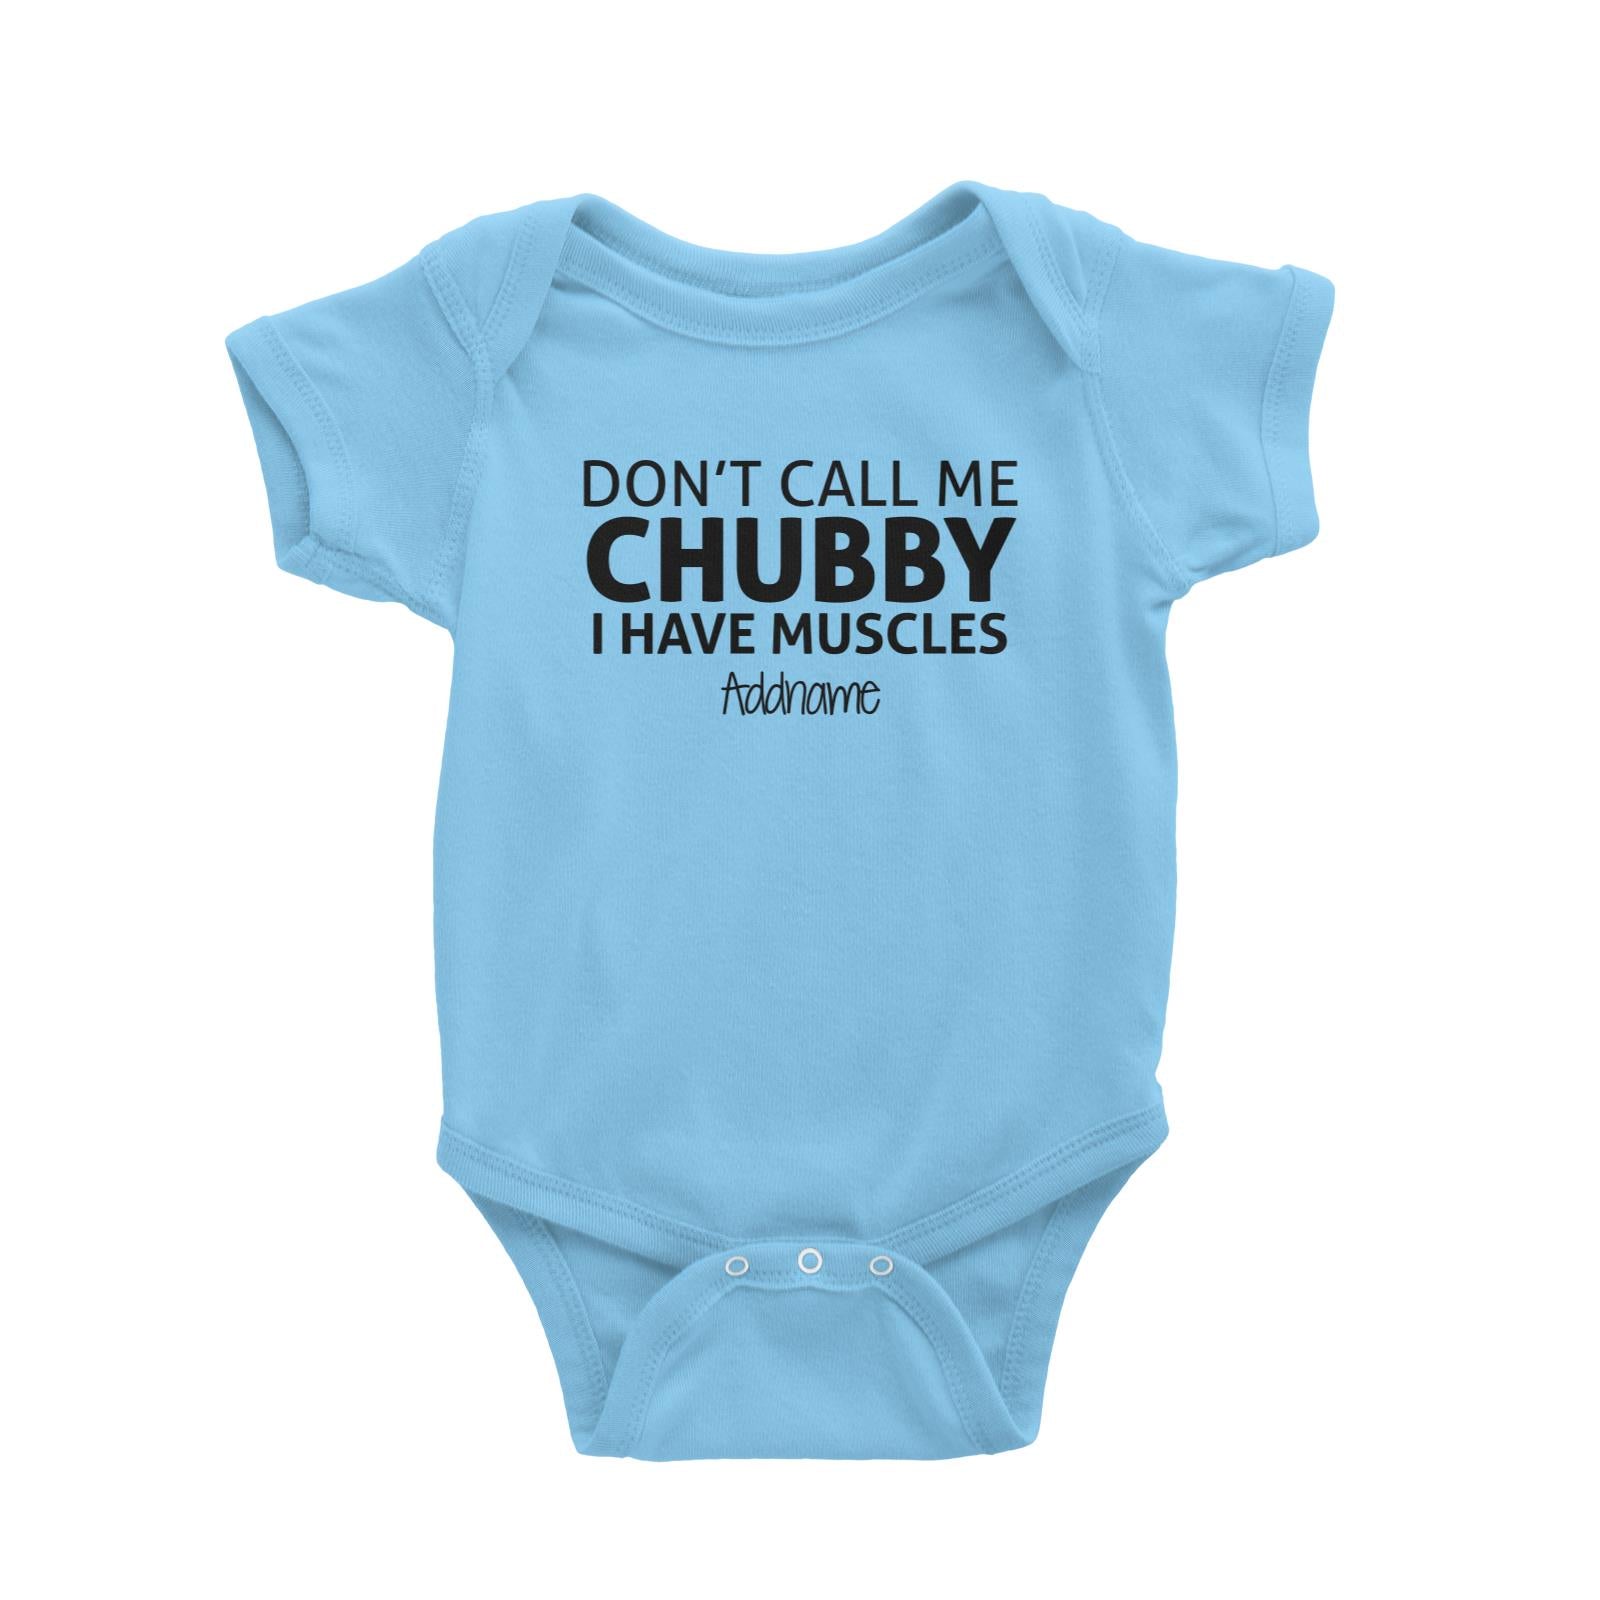 Dont Call Me Chubby I Have Muscles Addname Baby Romper